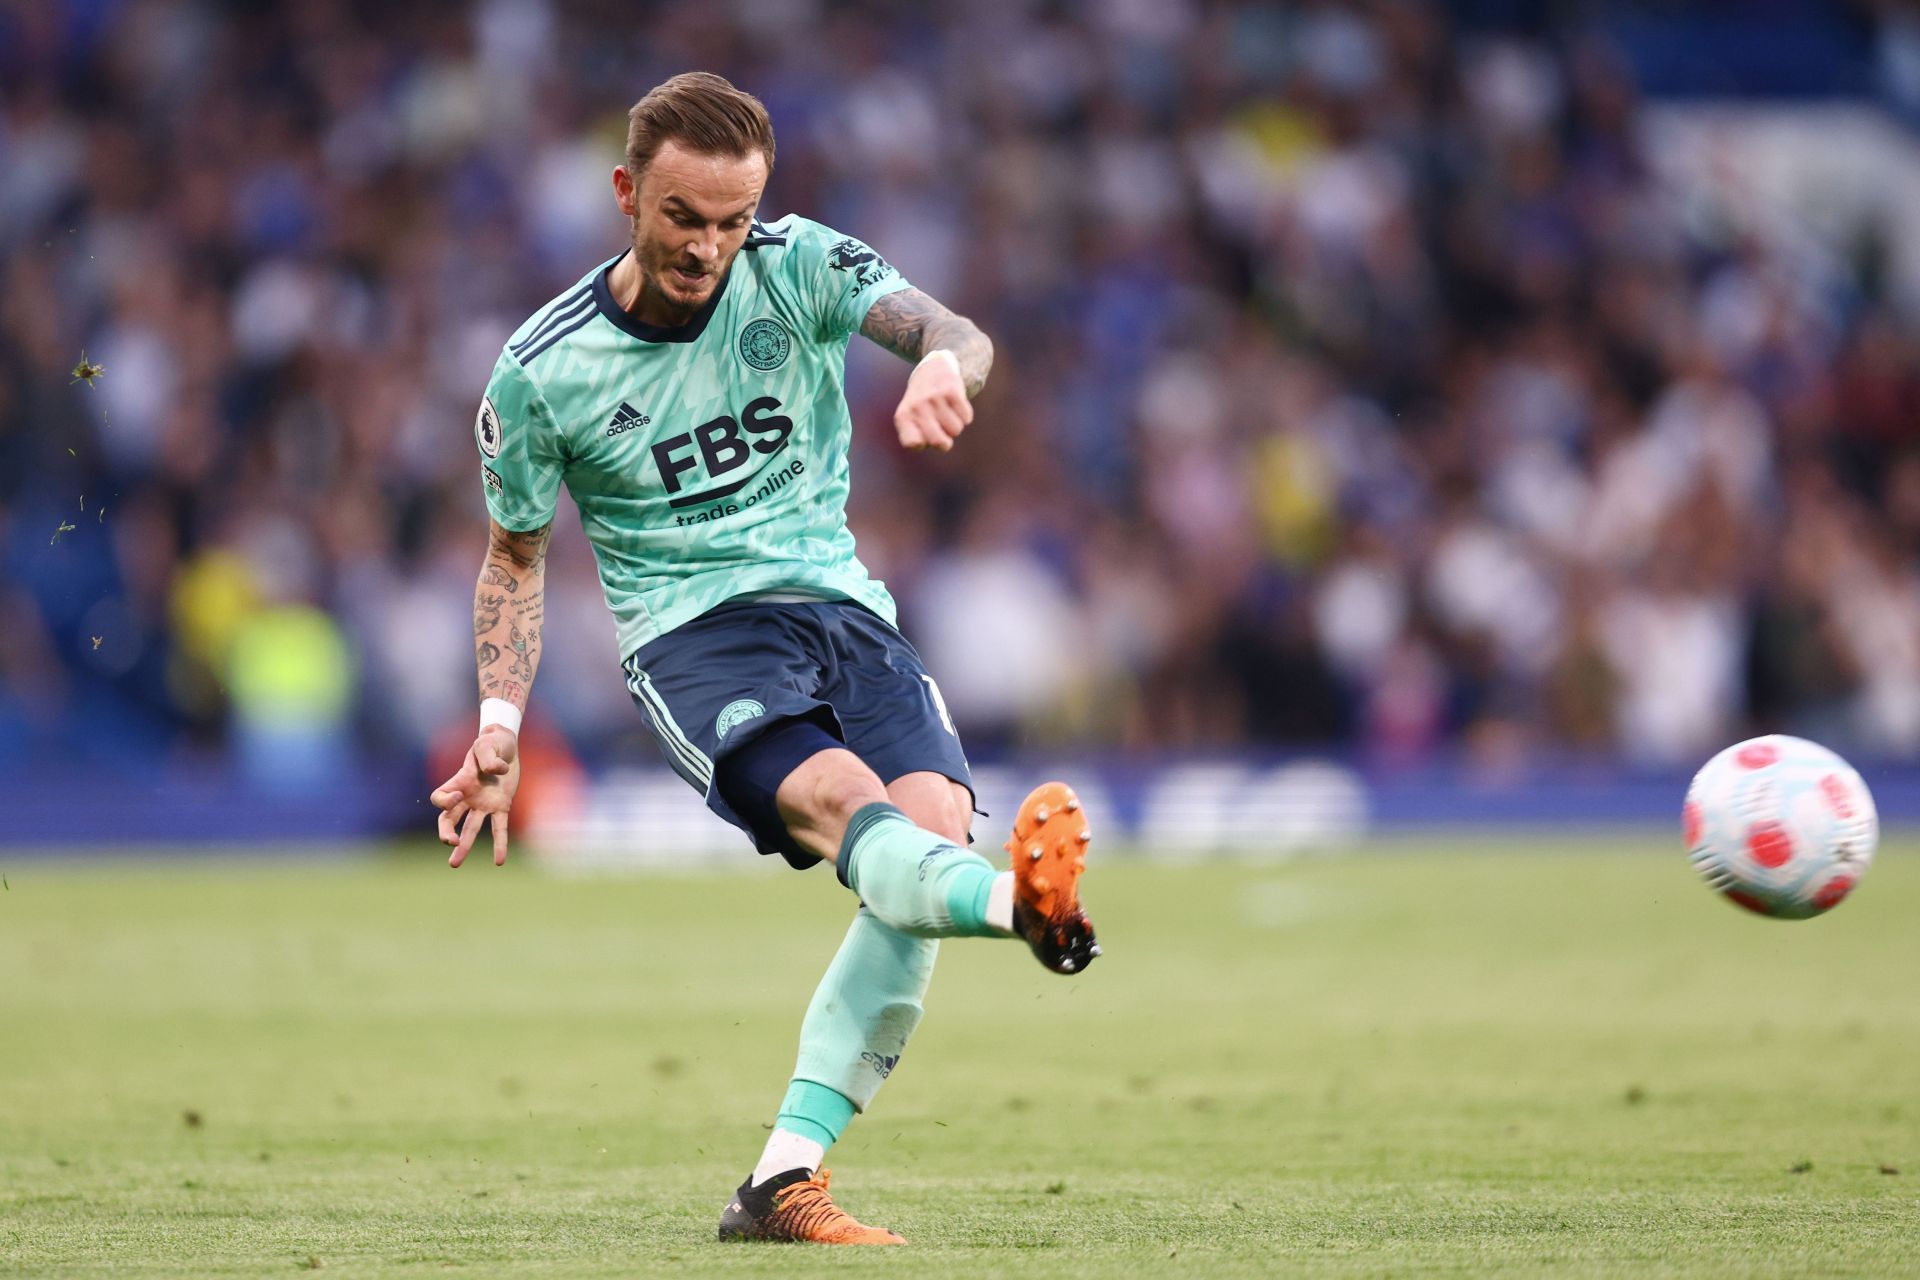 James Maddison is making his case for the World Cup squad